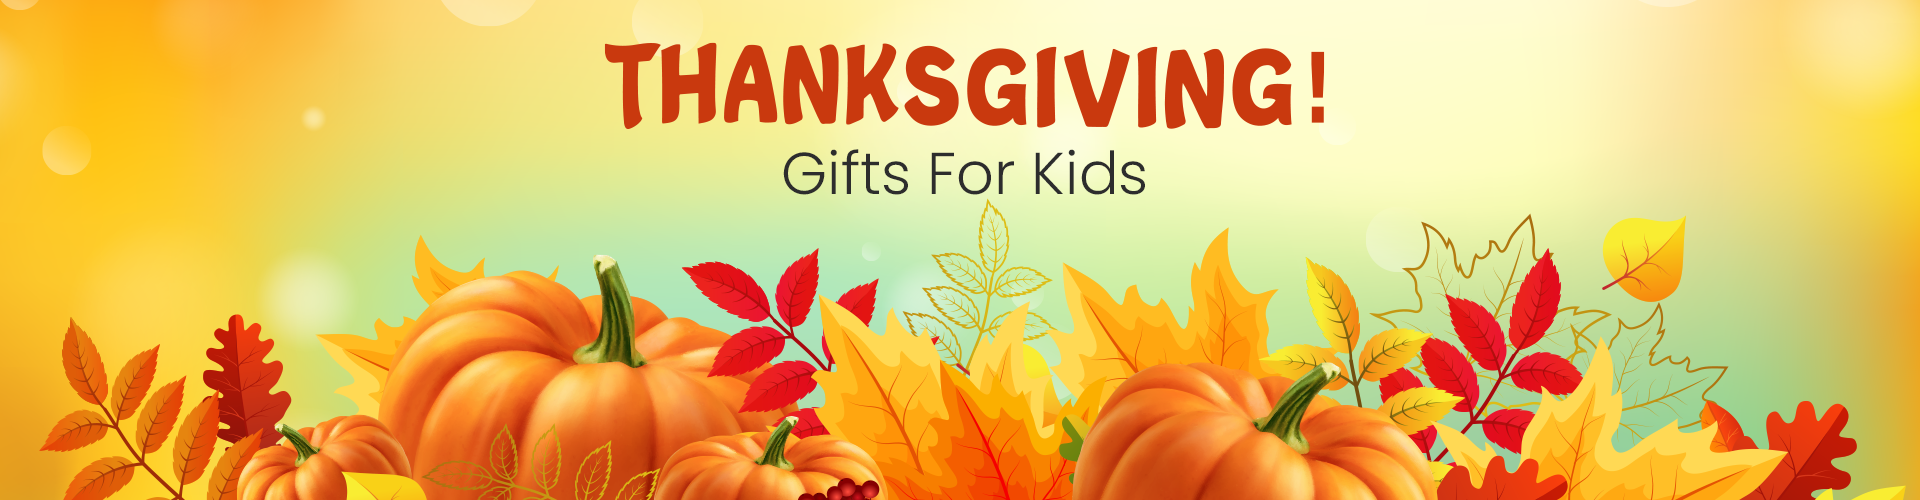 Thanksgiving Gifts For Kids